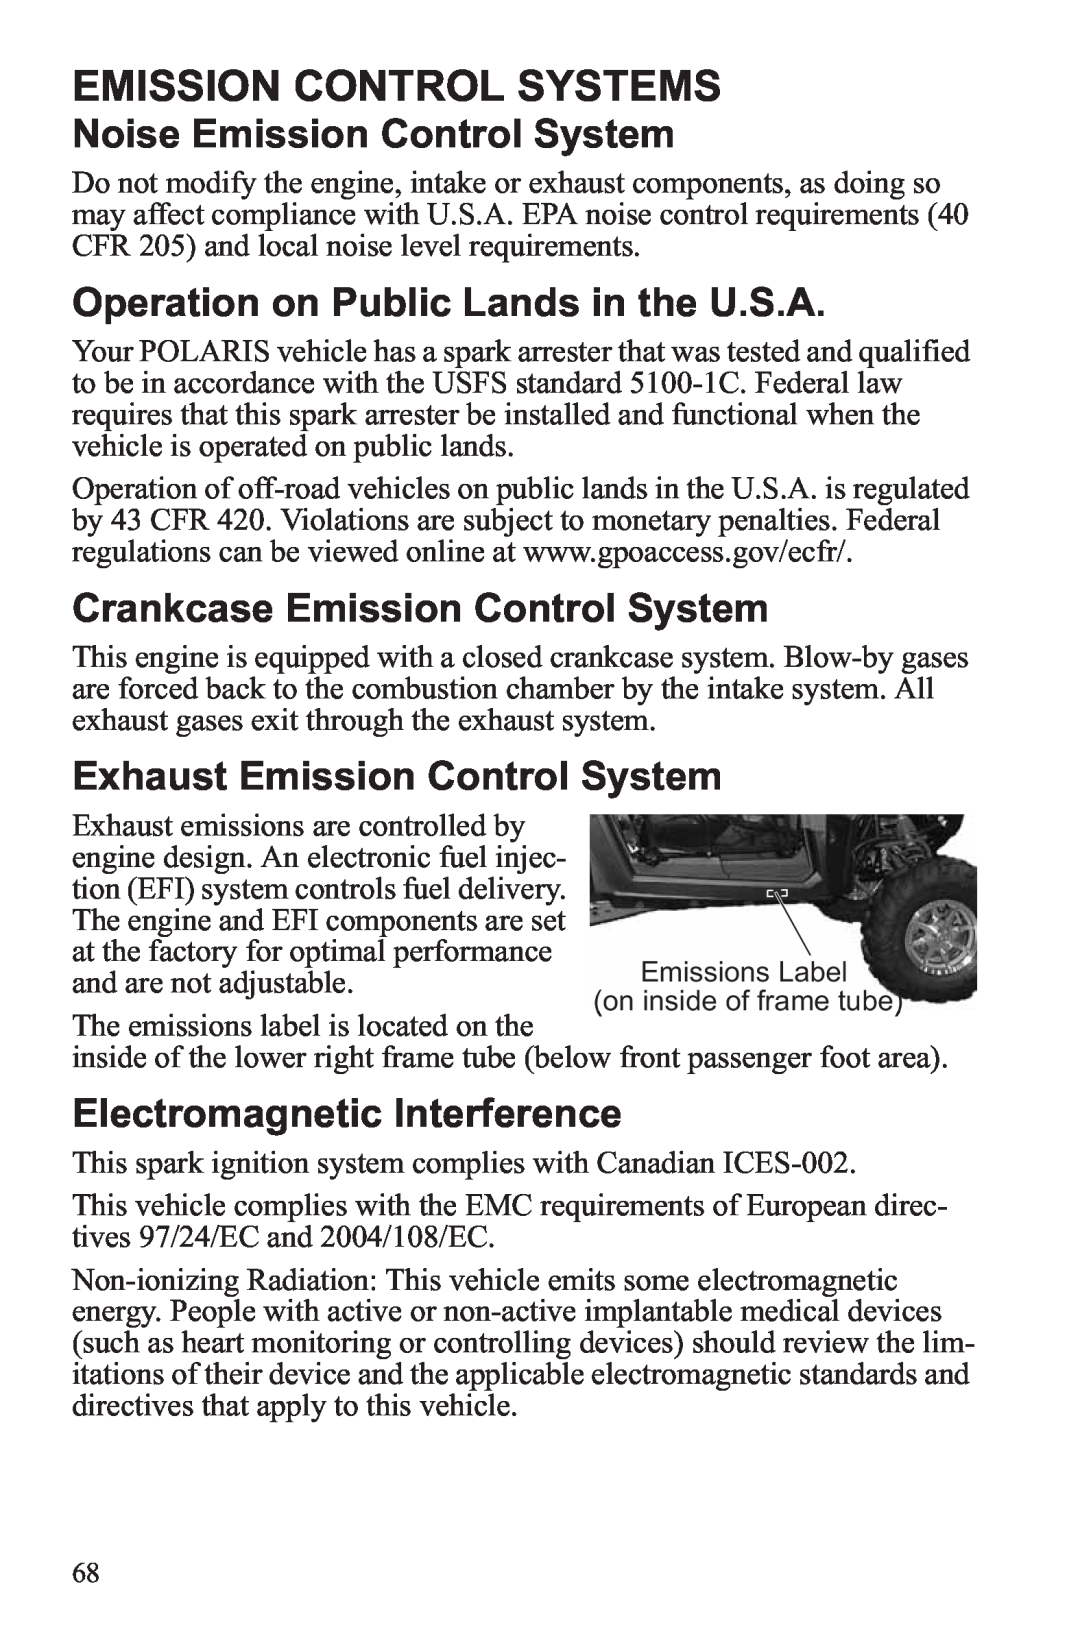 Polaris RZR XP 4 900 Emission Control Systems, Noise Emission Control System, Operation on Public Lands in the U.S.A 